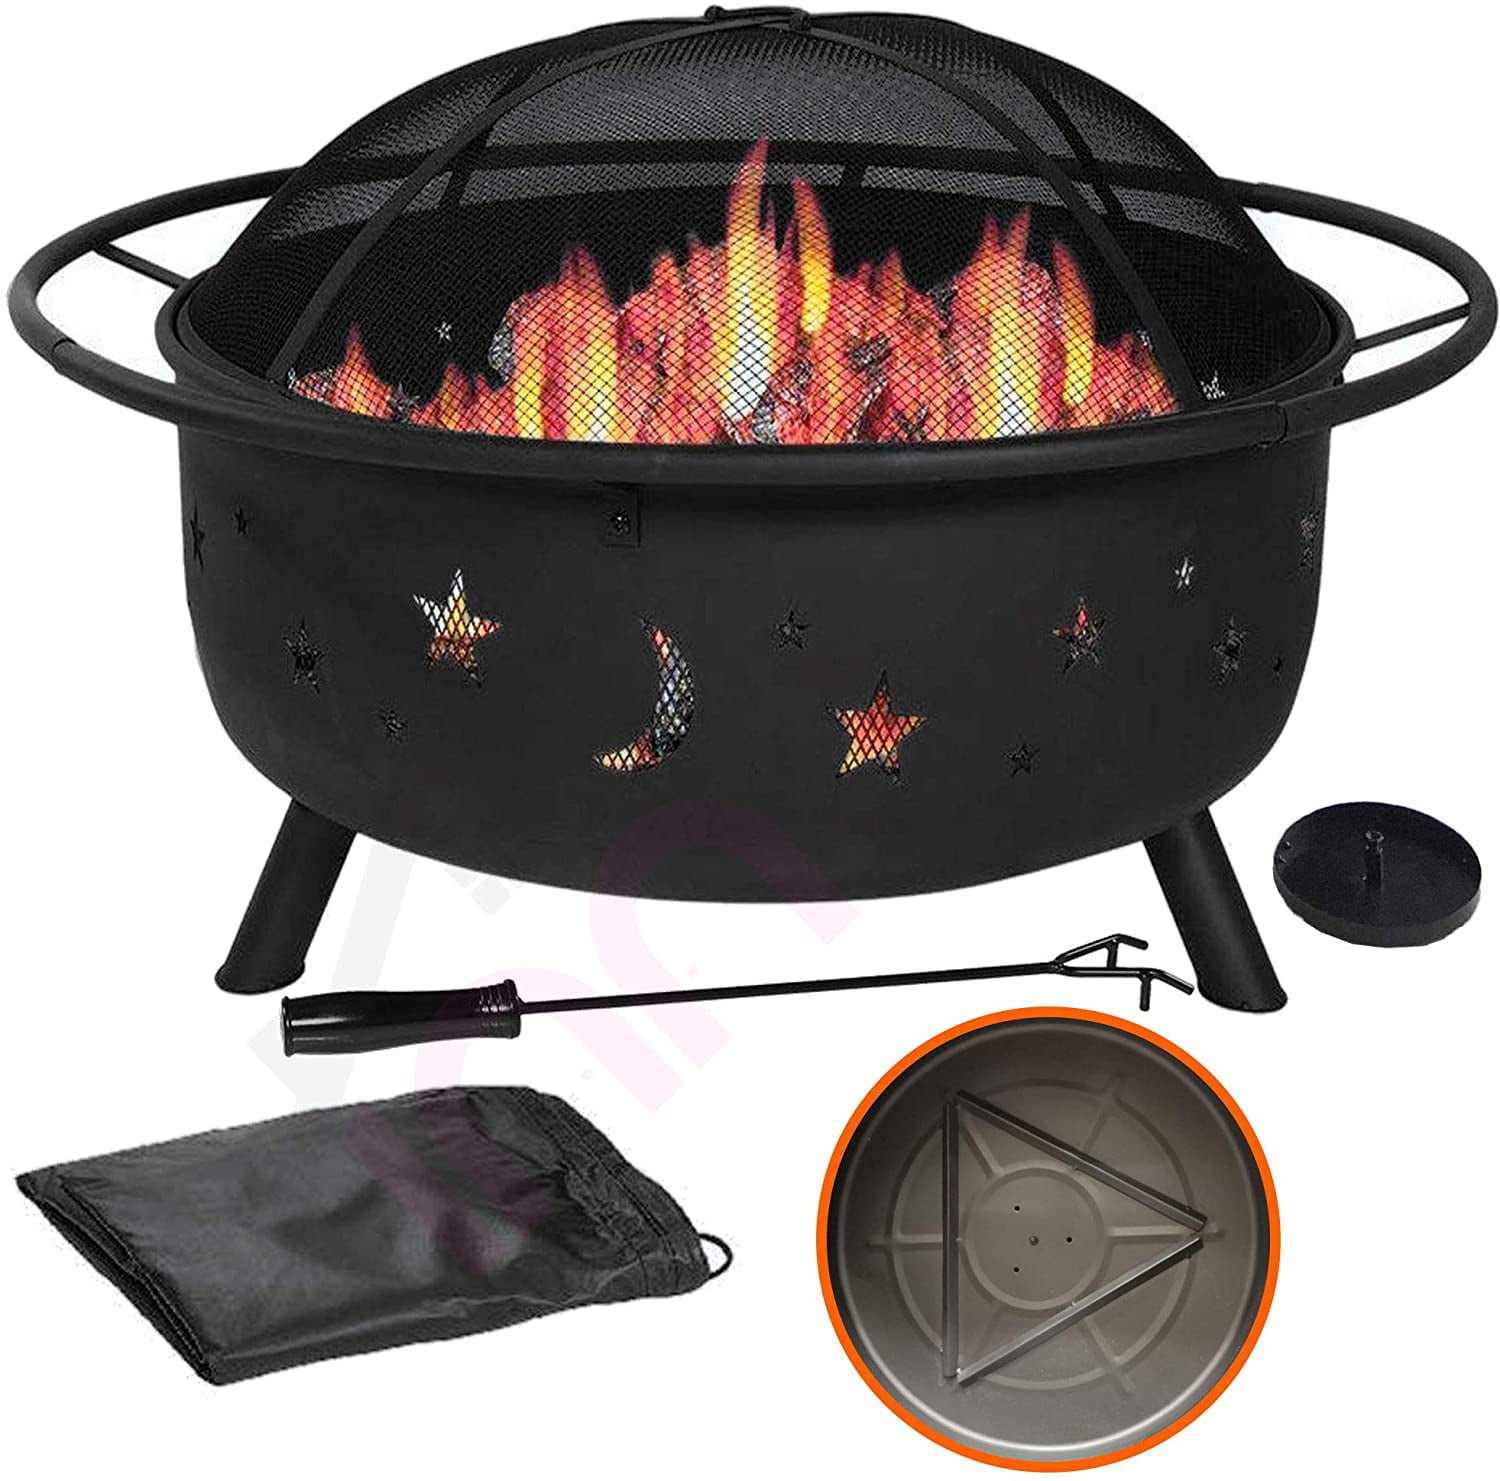 31 Outdoor Fire Pit Set Waterproof Cover 6-in-1 Large Bonfire Wood Burning Firepit Bowl Ash Plate For Outdoor Backyard Terrace Patio Drainage Holes Fireplace Poker Spark Screen Metal Grate 